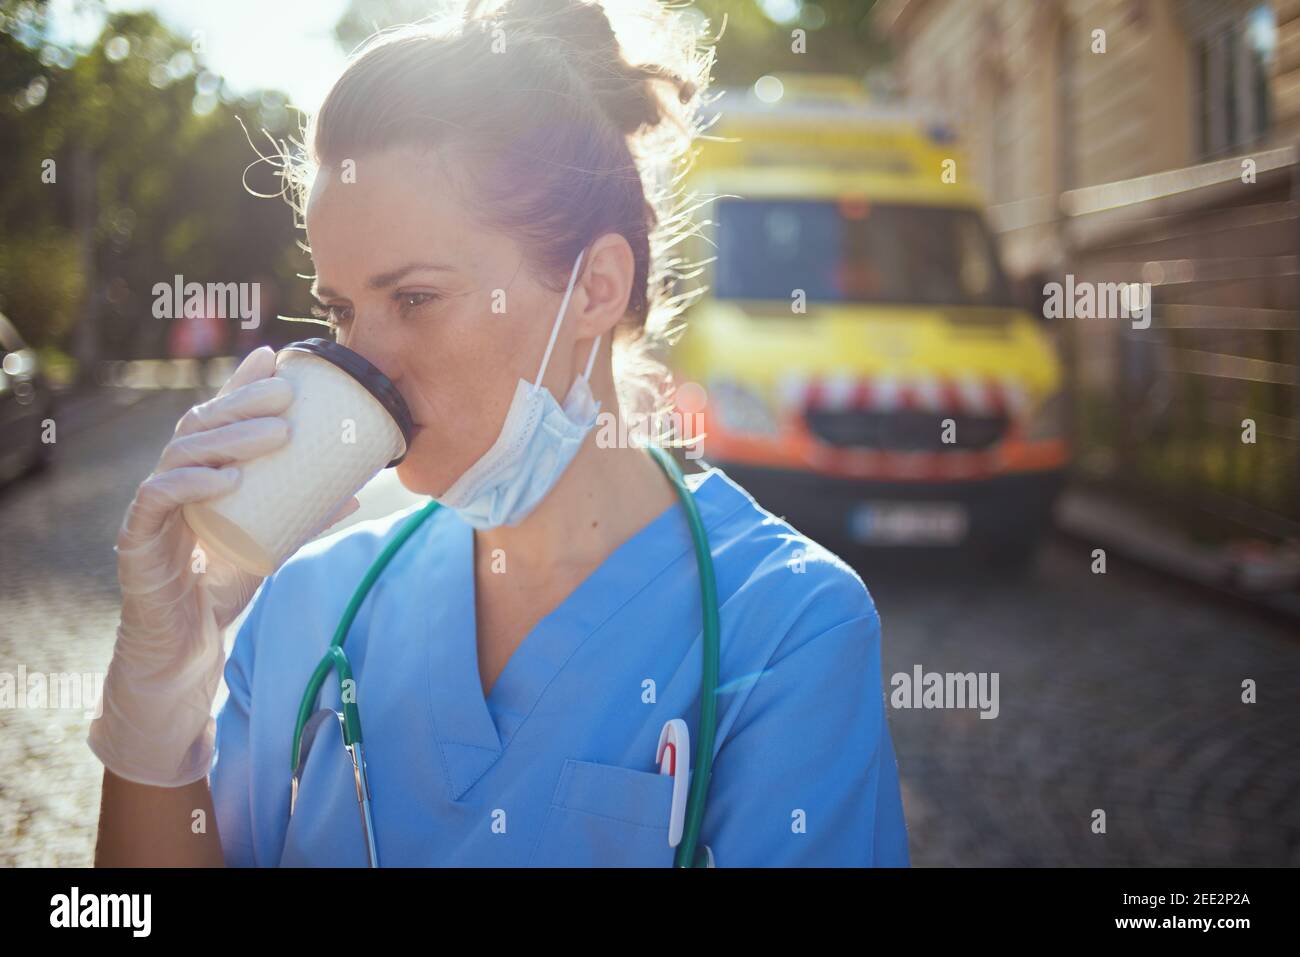 covid-19 pandemic. tired modern medical doctor woman in uniform with stethoscope, medical mask and cup of coffee outside near ambulance. Stock Photo